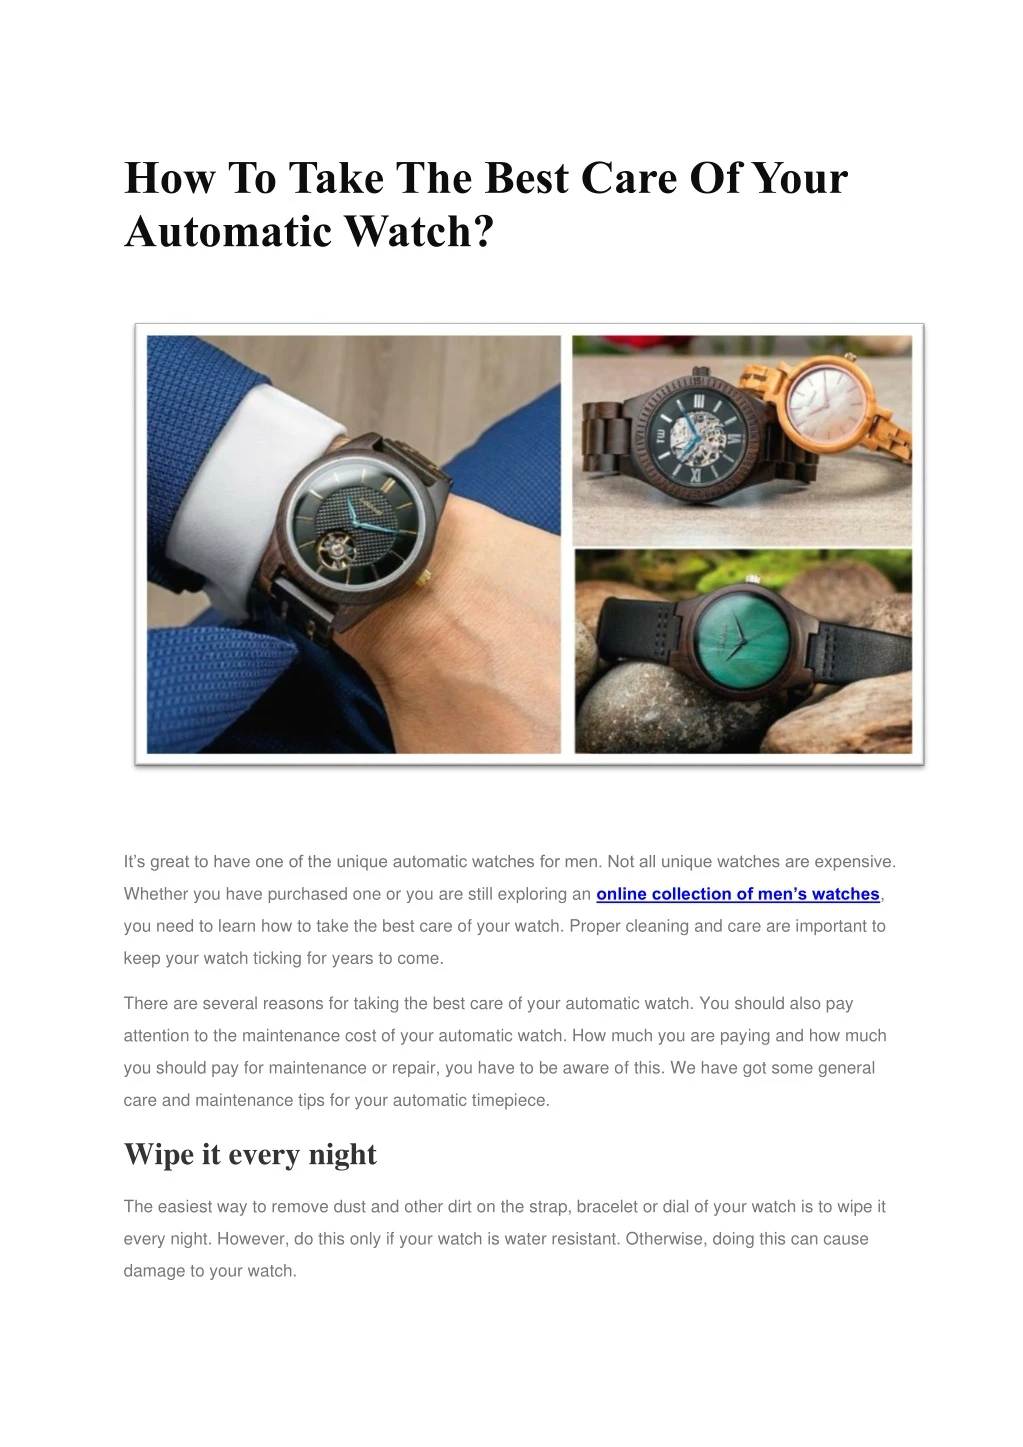 how to take the best care of your automatic watch